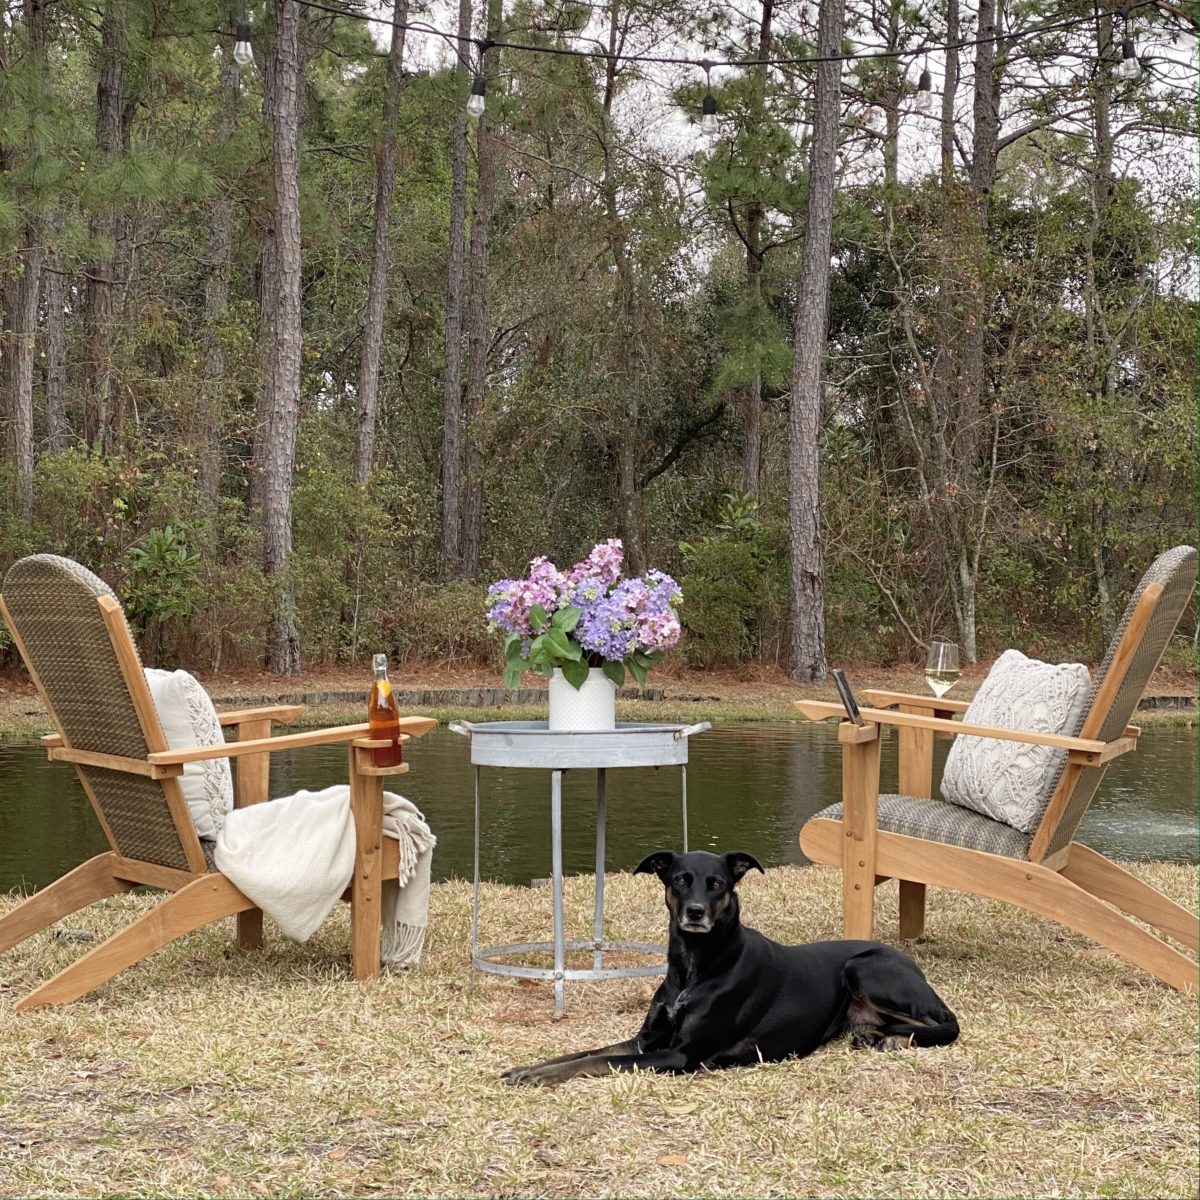 Adirondack chairs set by the pond with a black dog in the foreground.